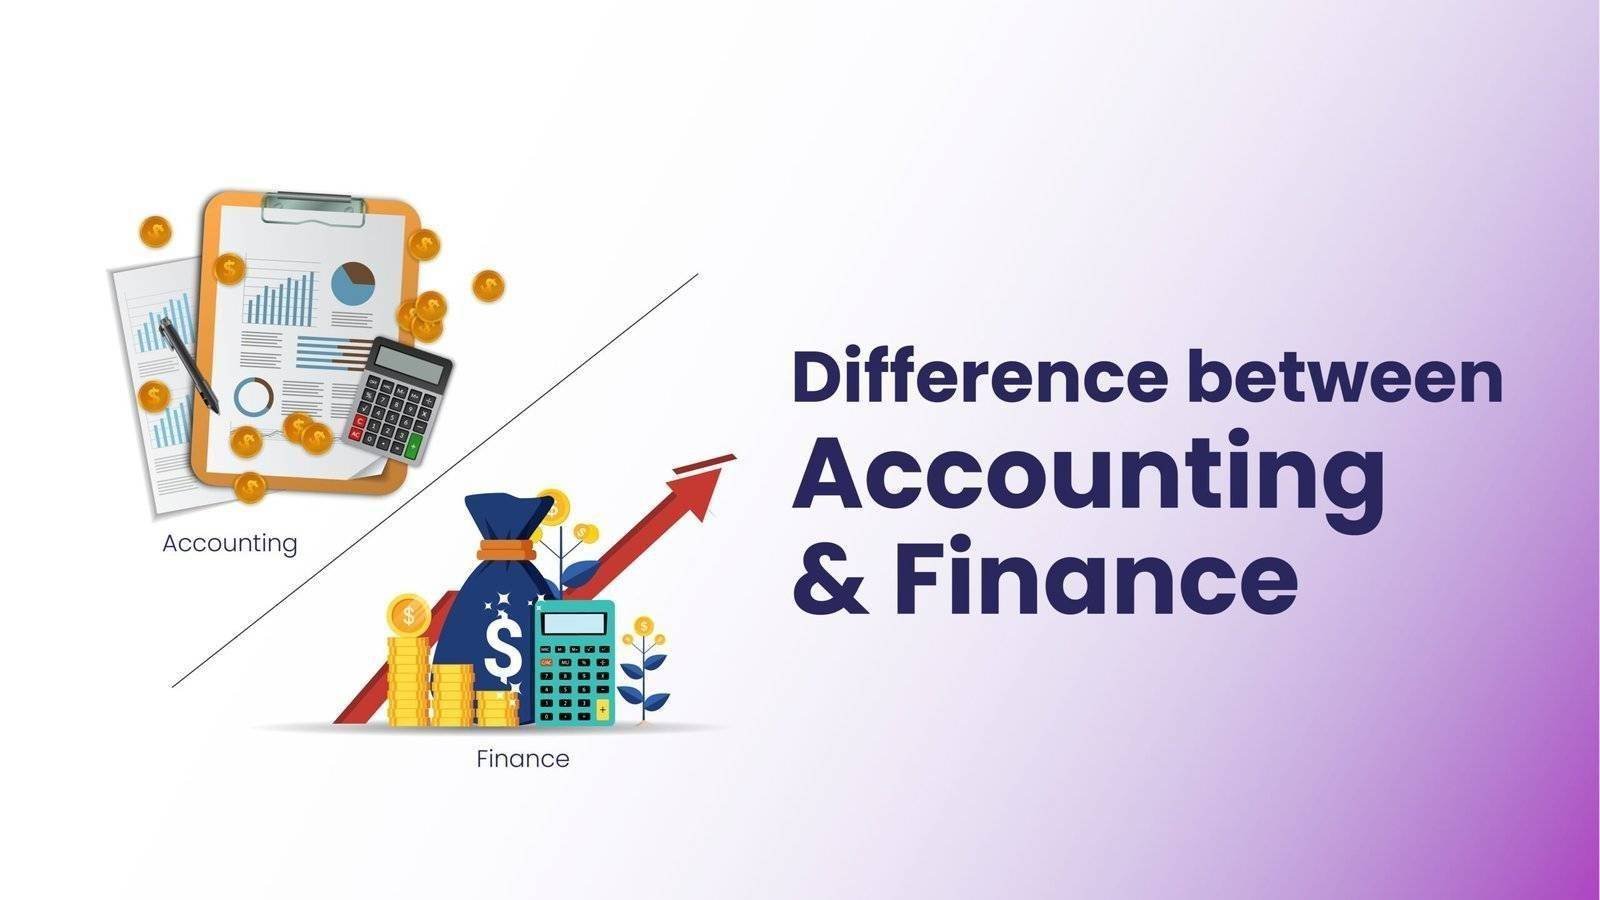 Don’t Get Confused With The Difference Between Finance and Accounting